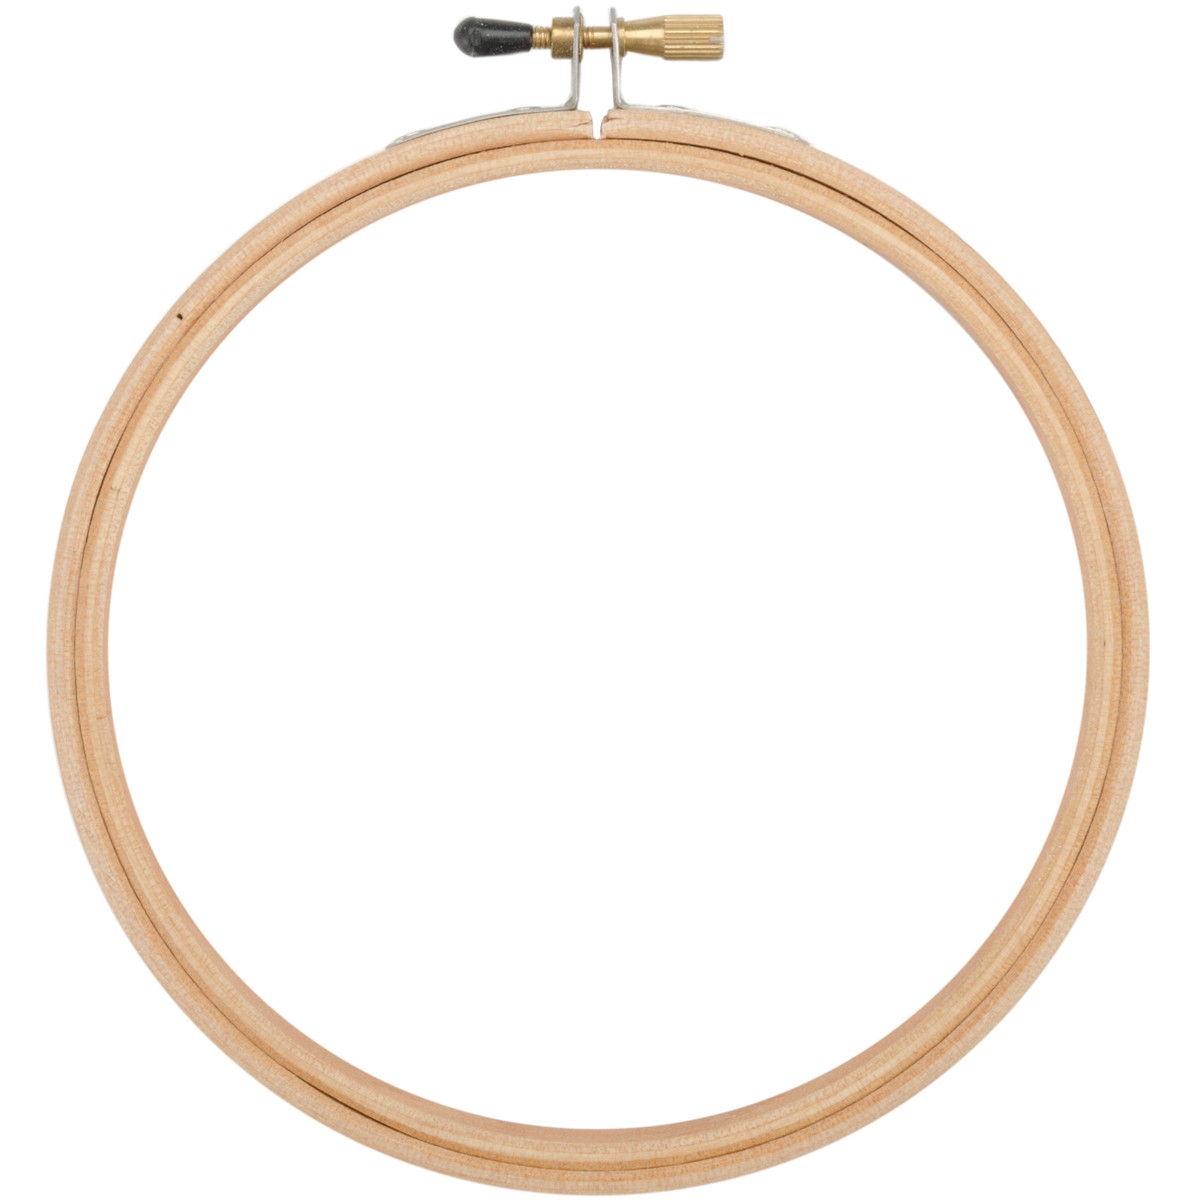 Embroidery Hoops: What are They, Their Uses, and Pictures